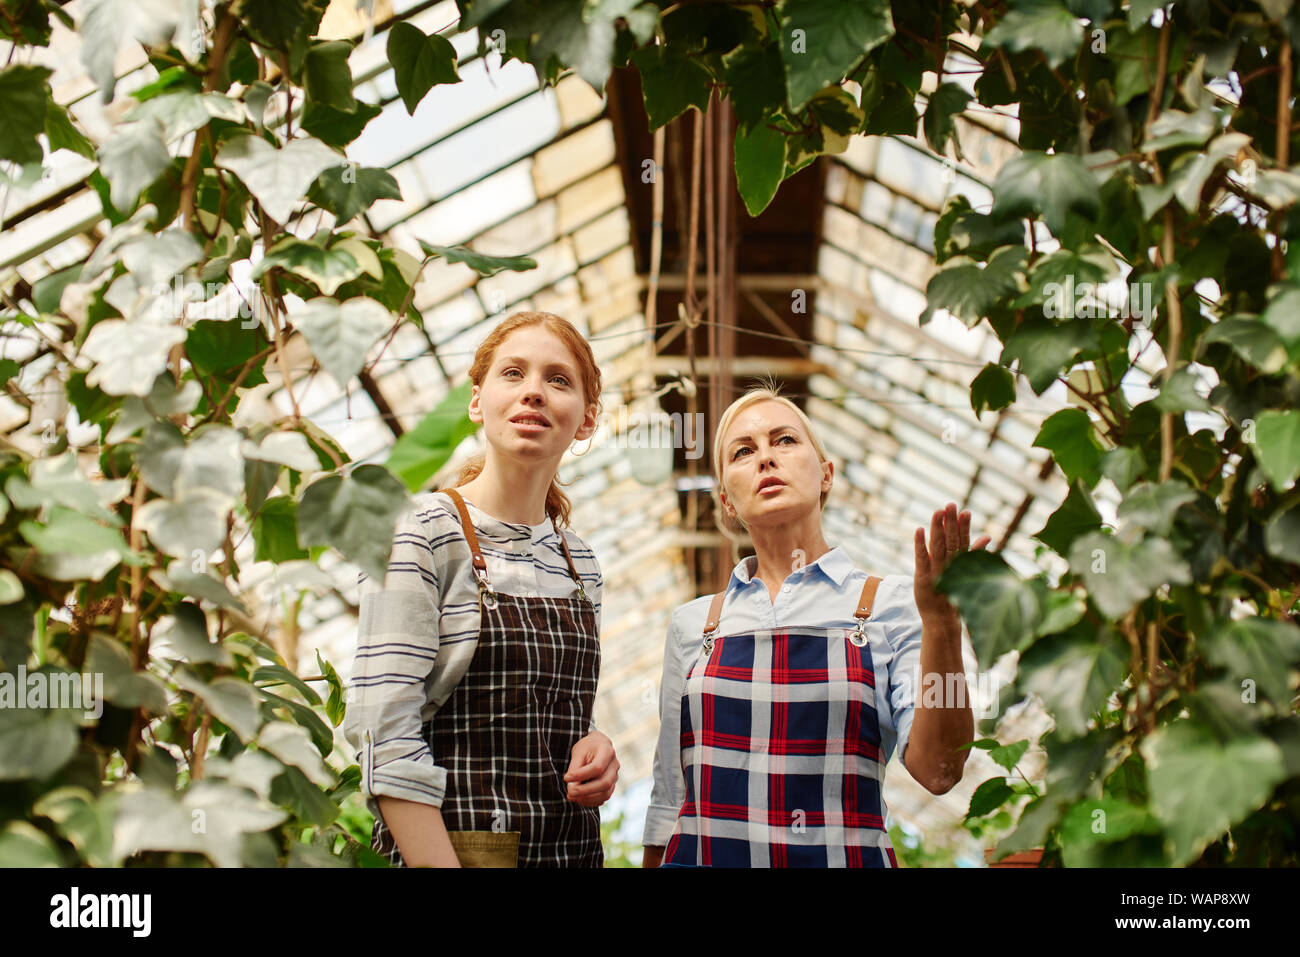 Two women in aprons look at the grapes grown at the greenhouse located in the winery. Stock Photo